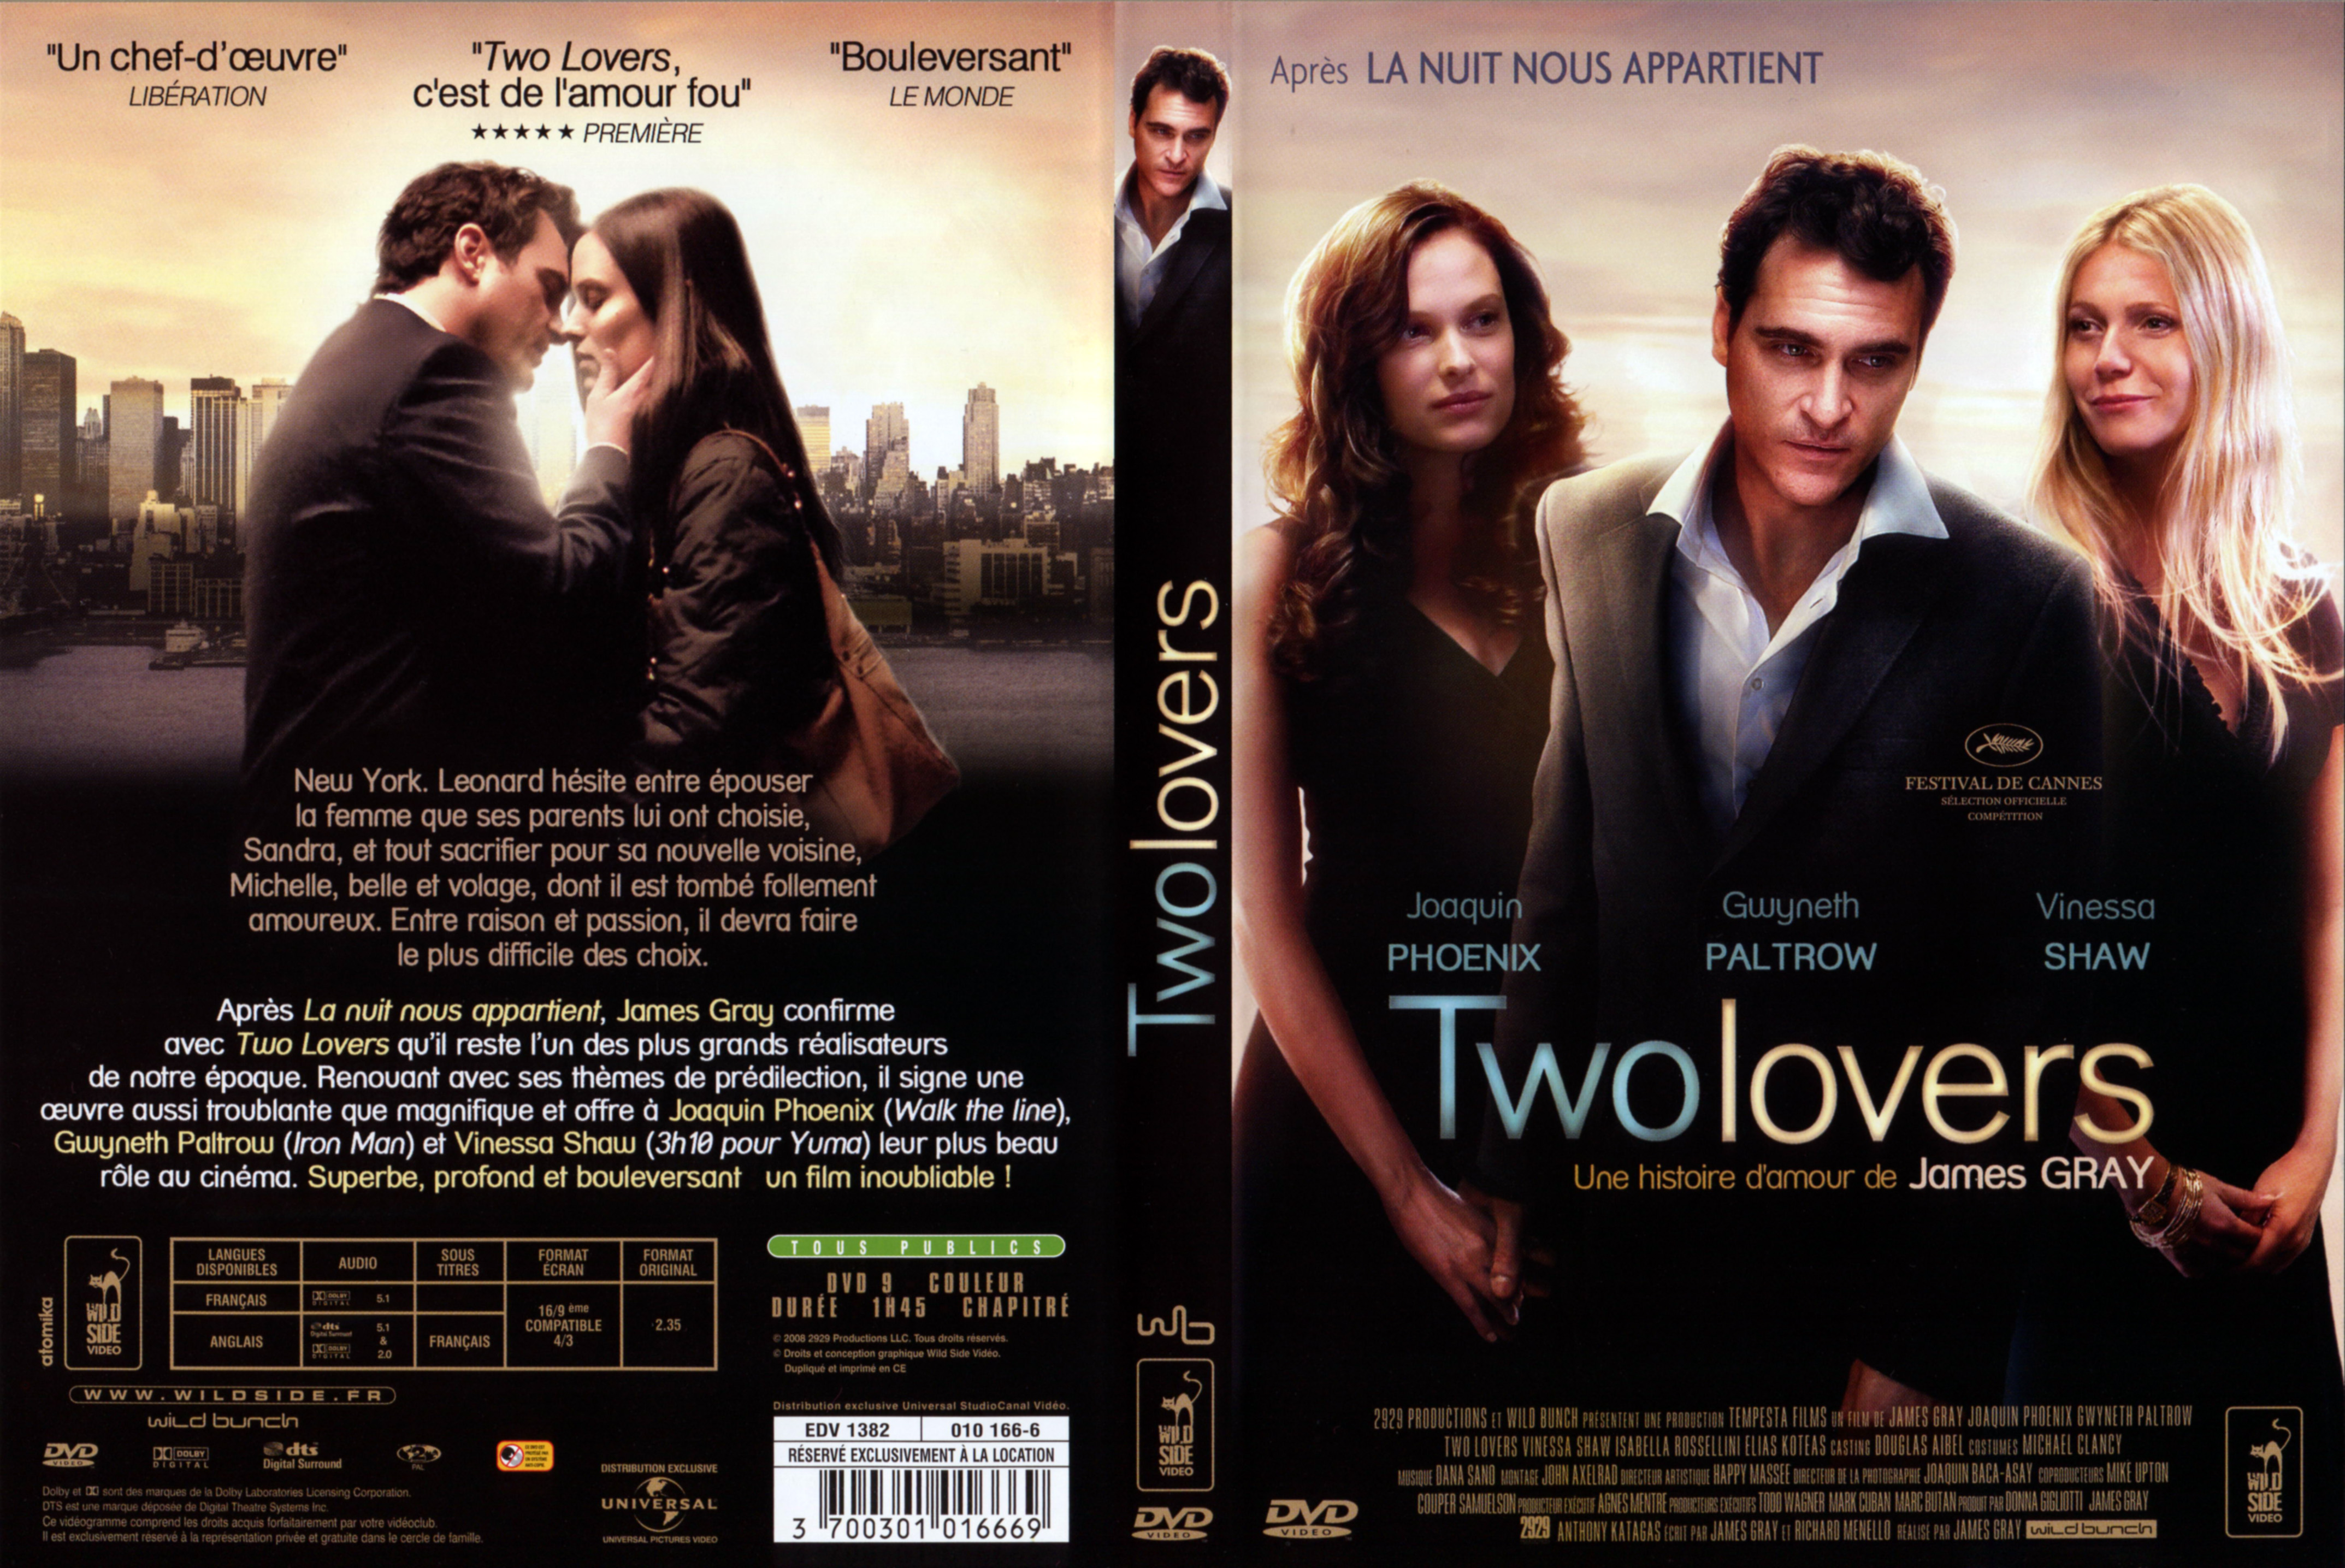 Jaquette DVD Two lovers v2